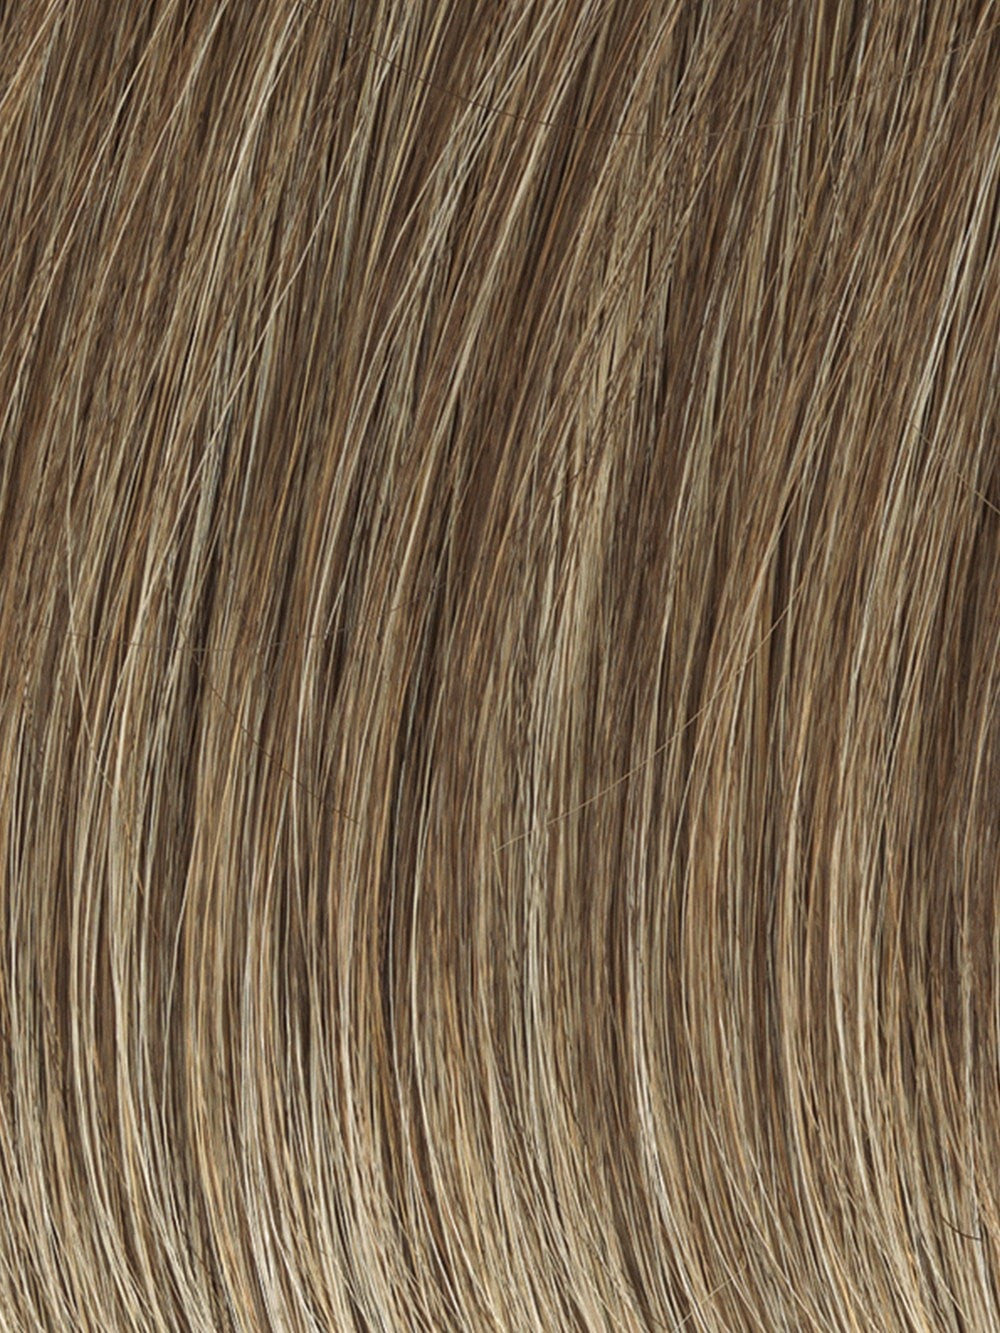 923 BROWN-BLONDE | Medium to light brown with blonde highlights 